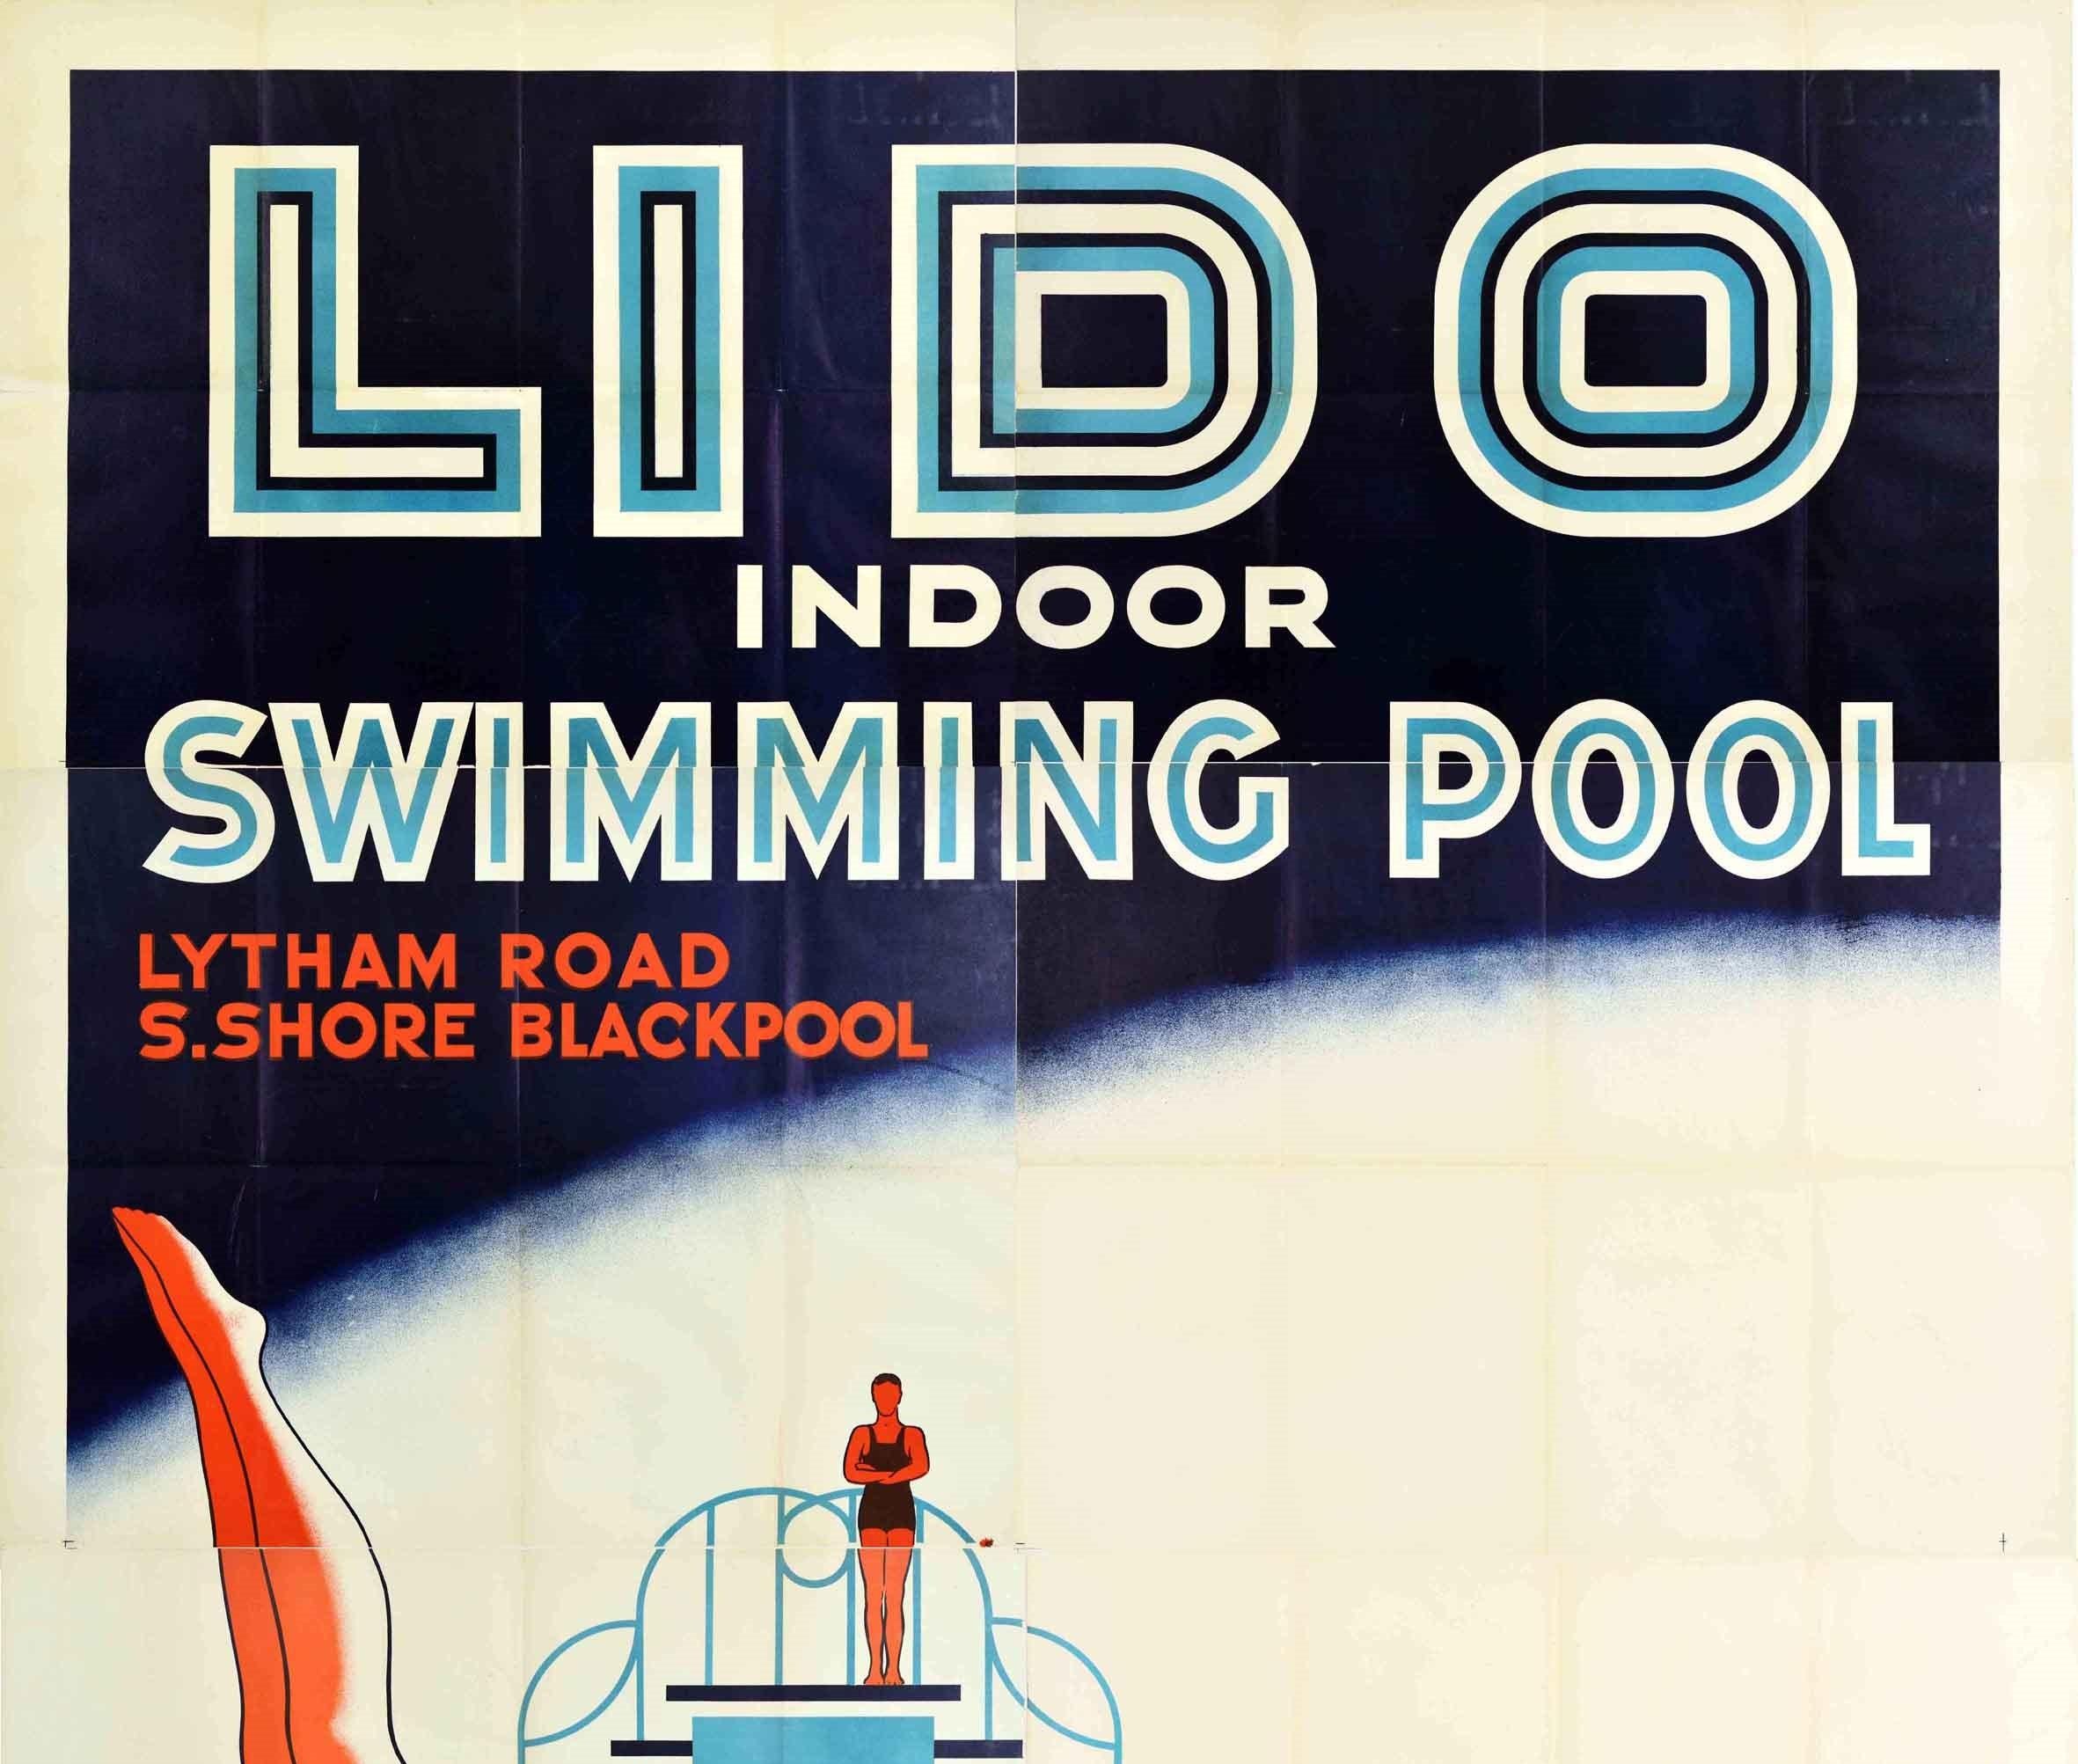 Very large size original vintage travel advertising poster for the Lido indoor swimming pool Lytham Road S. Shore Blackpool featuring a stunning Art Deco design for the South Shore Lido (1923-1983) at the popular seaside resort town of Blackpool in